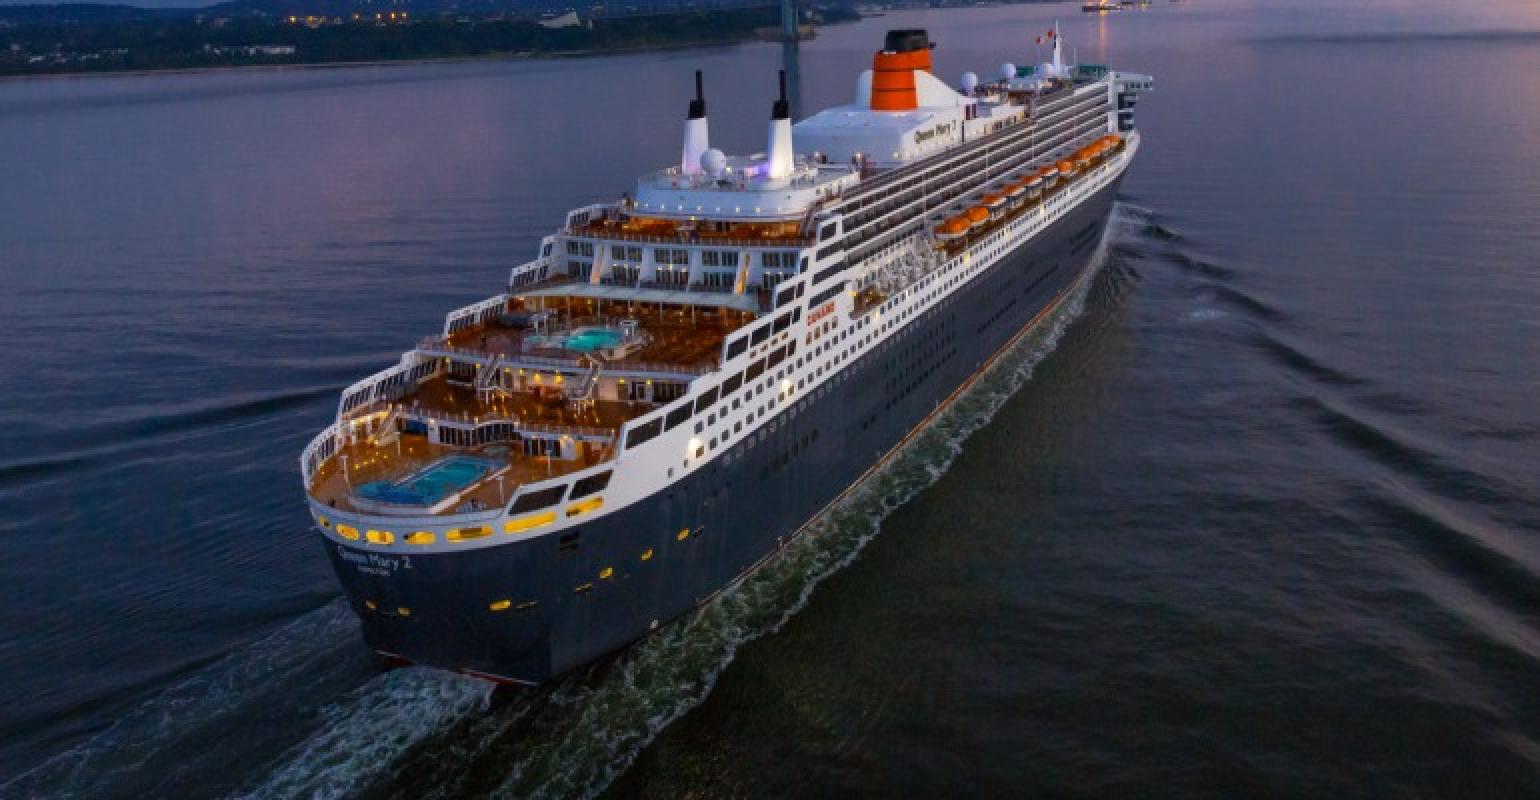 Cunard’s Queen Mary 2 sailing world cruise in 2022